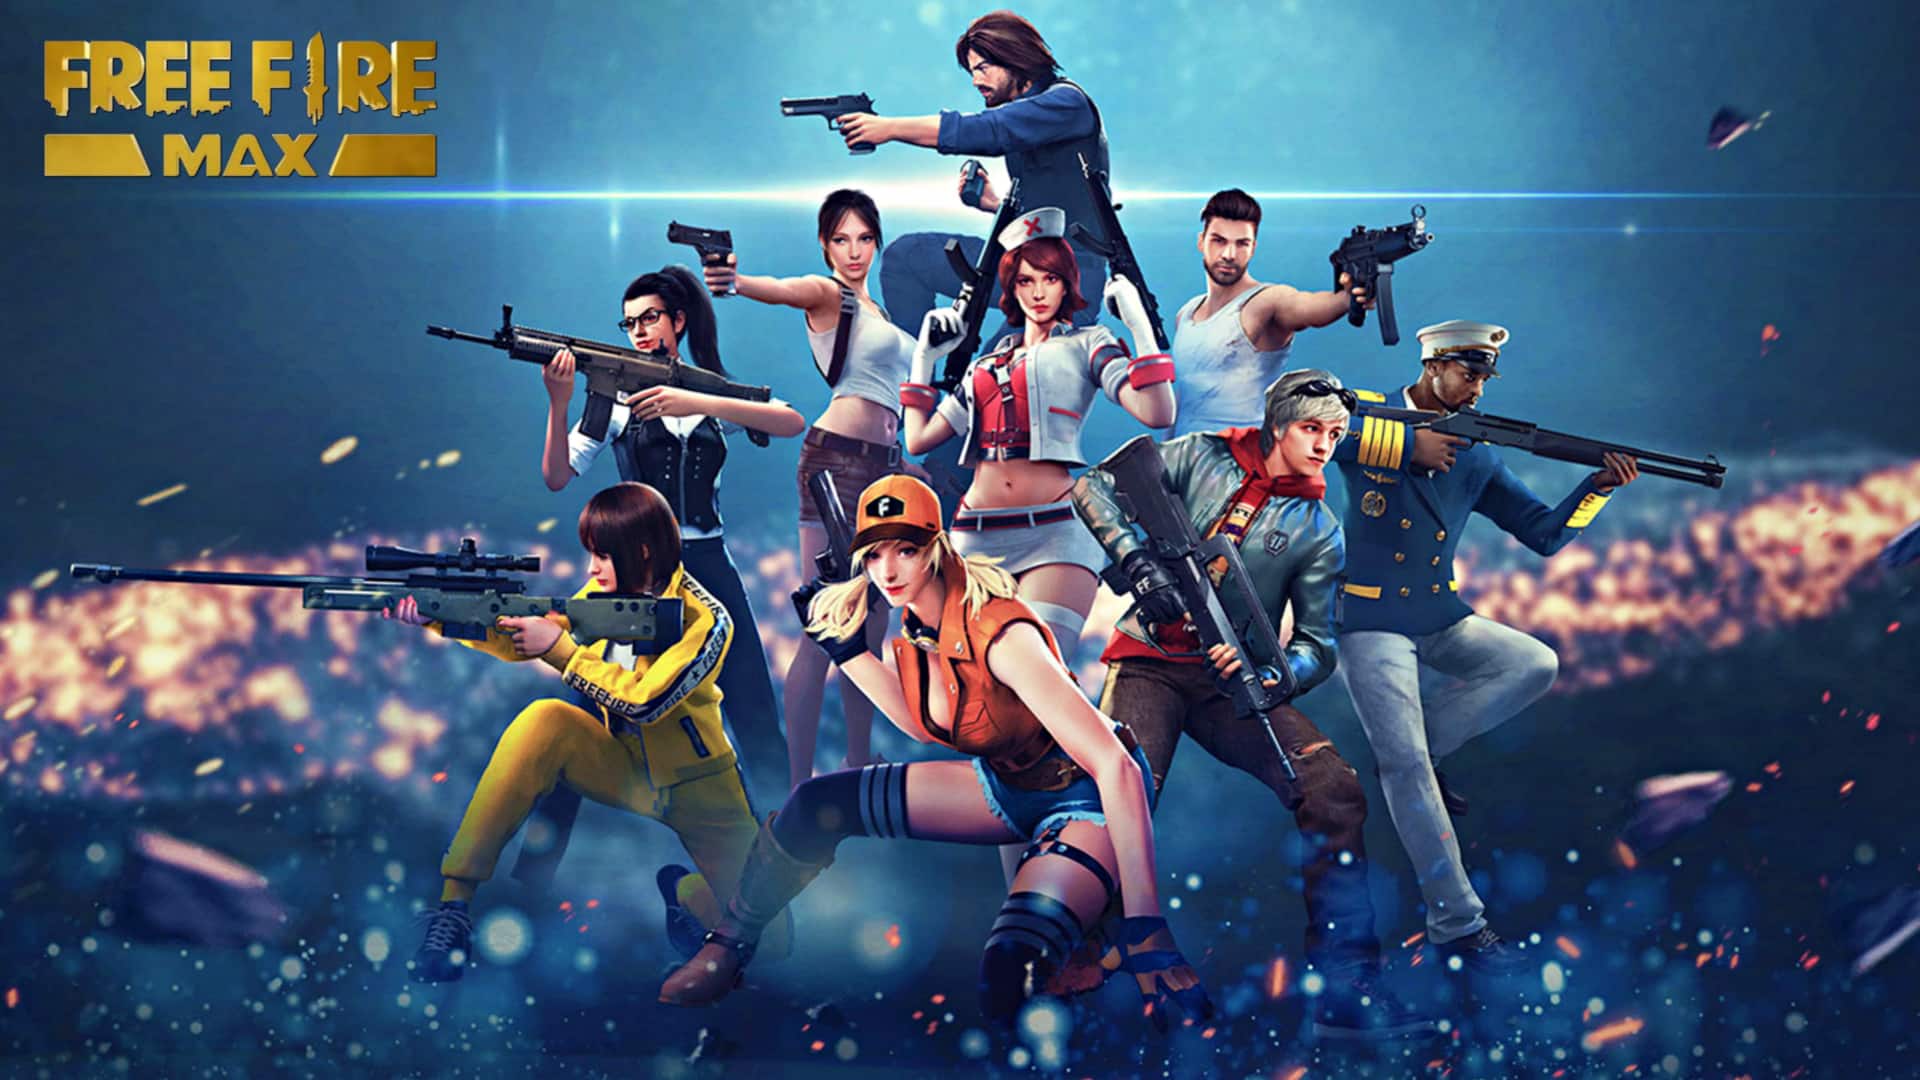 Free Fire MAX codes for March 11: How to redeem